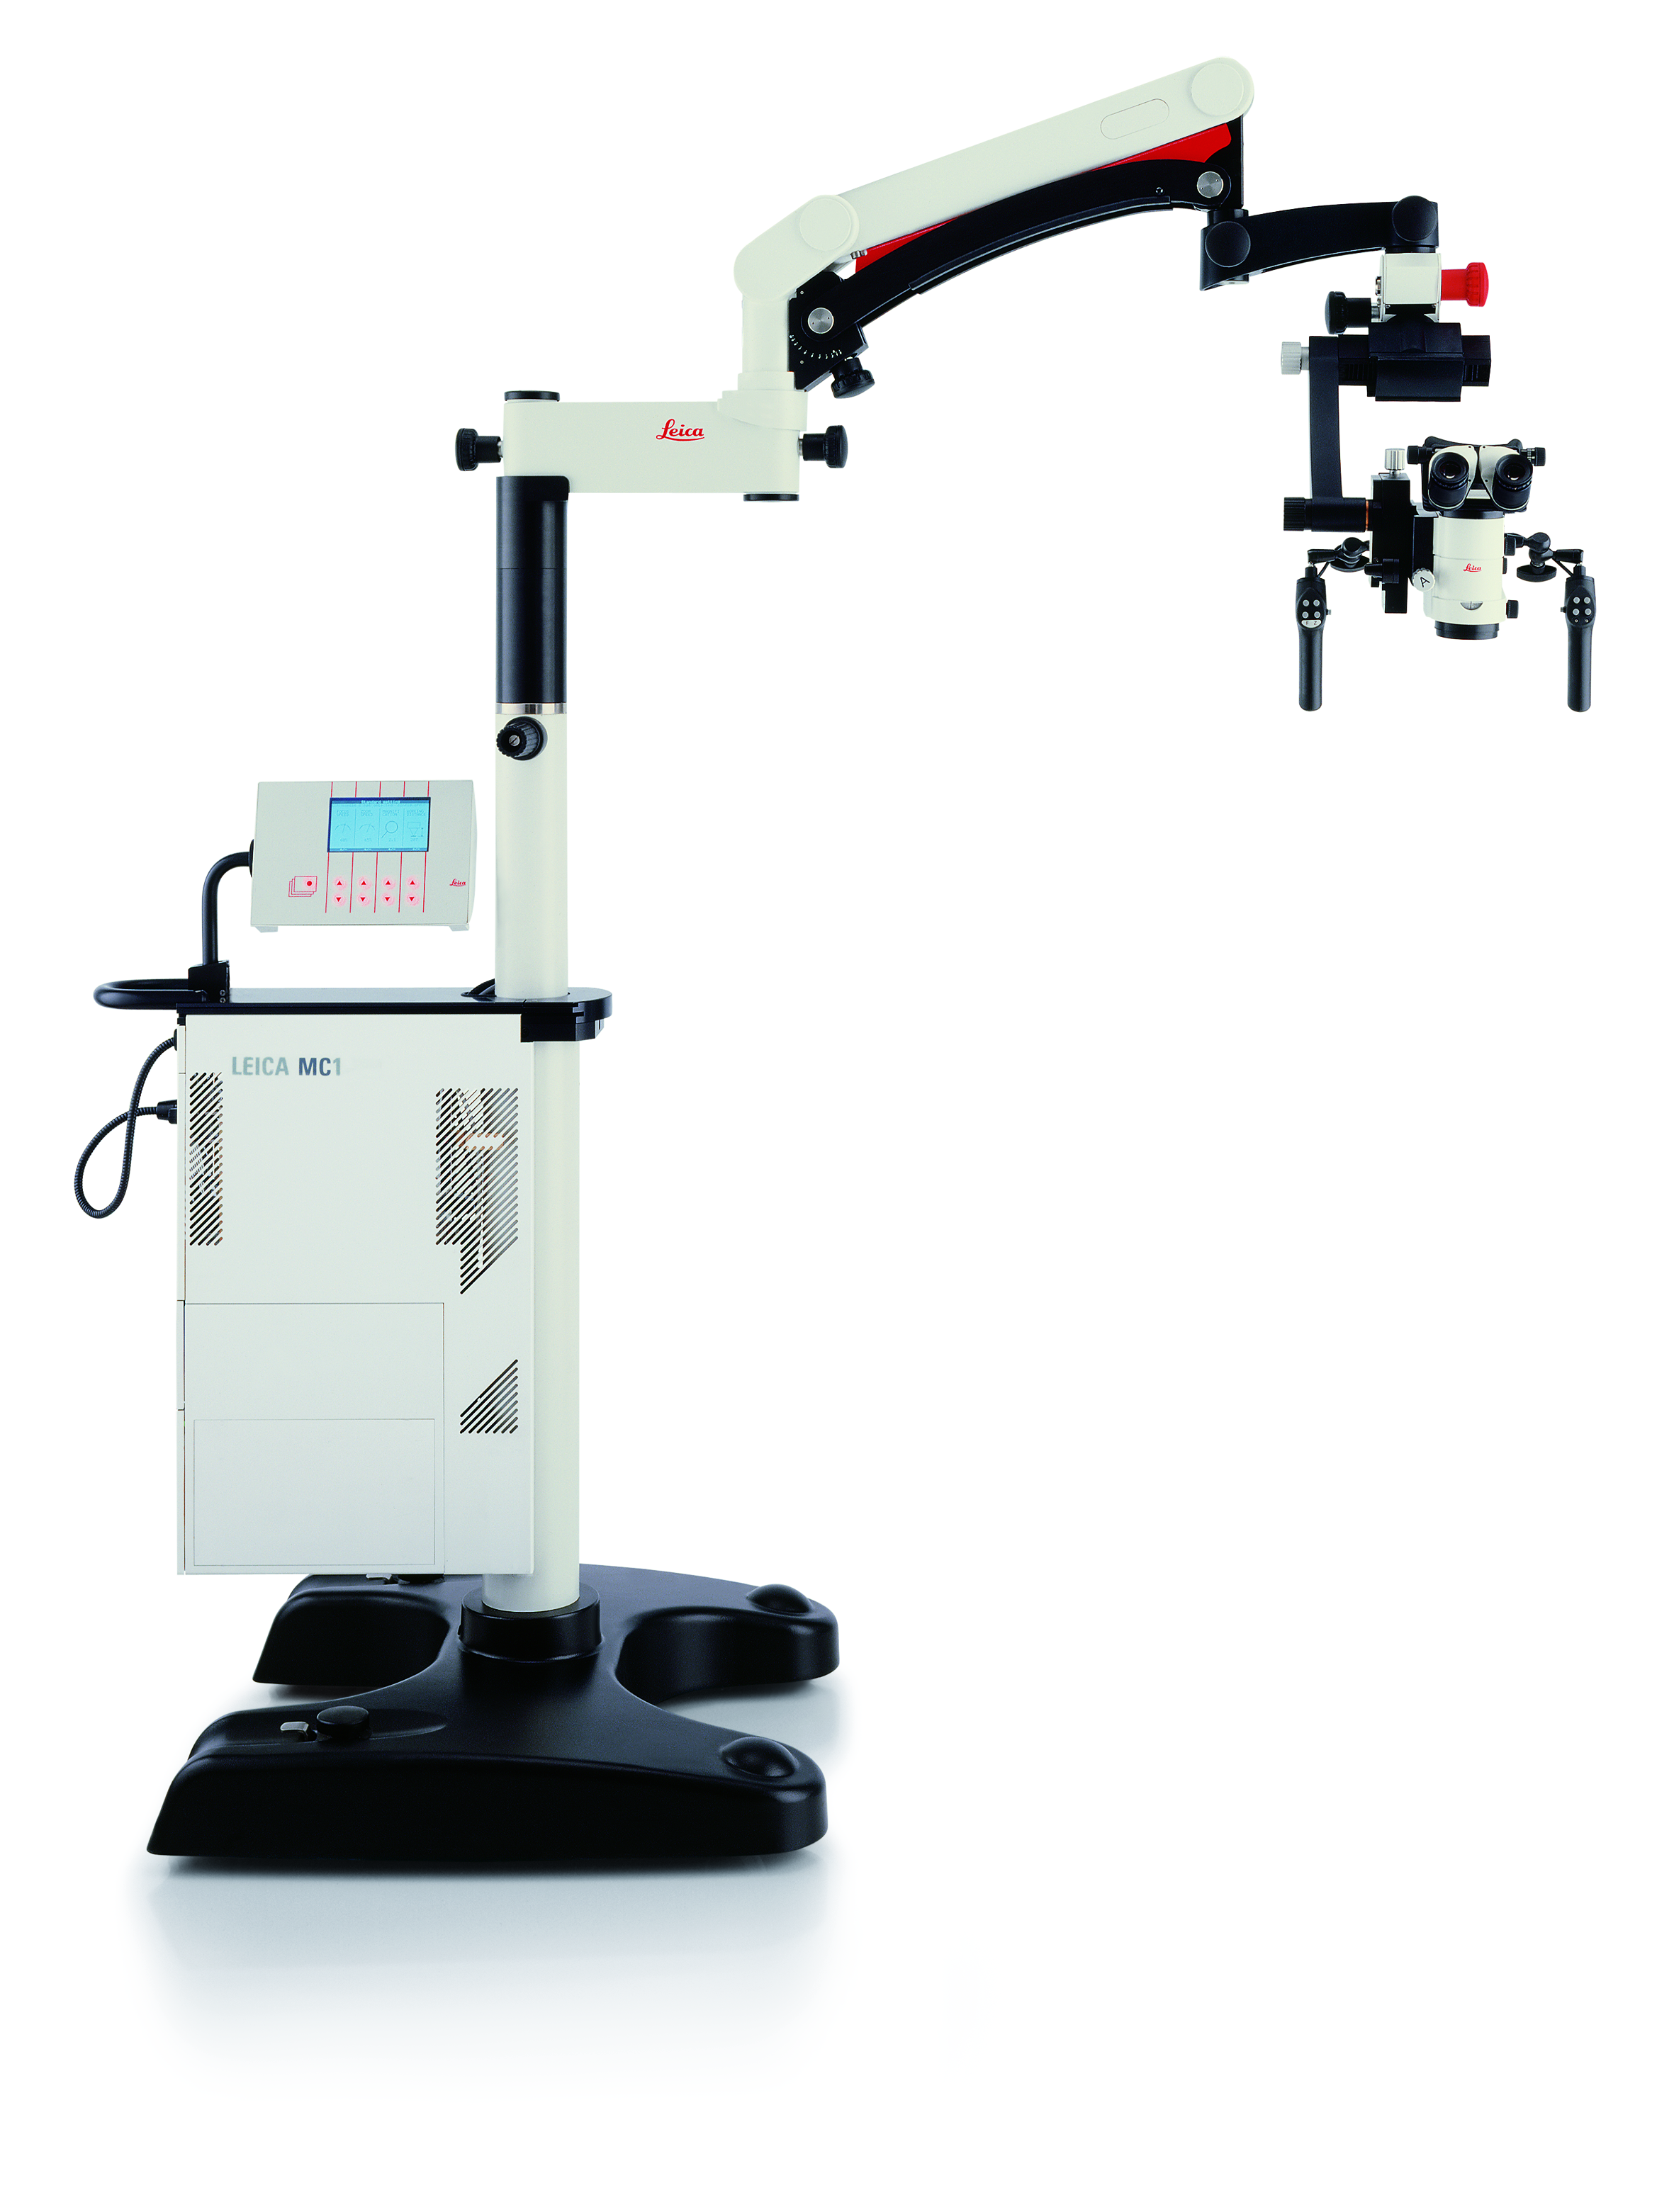 The Leica M525 MC1 surgical microscope solution for neurosurgery and ENT surgery.